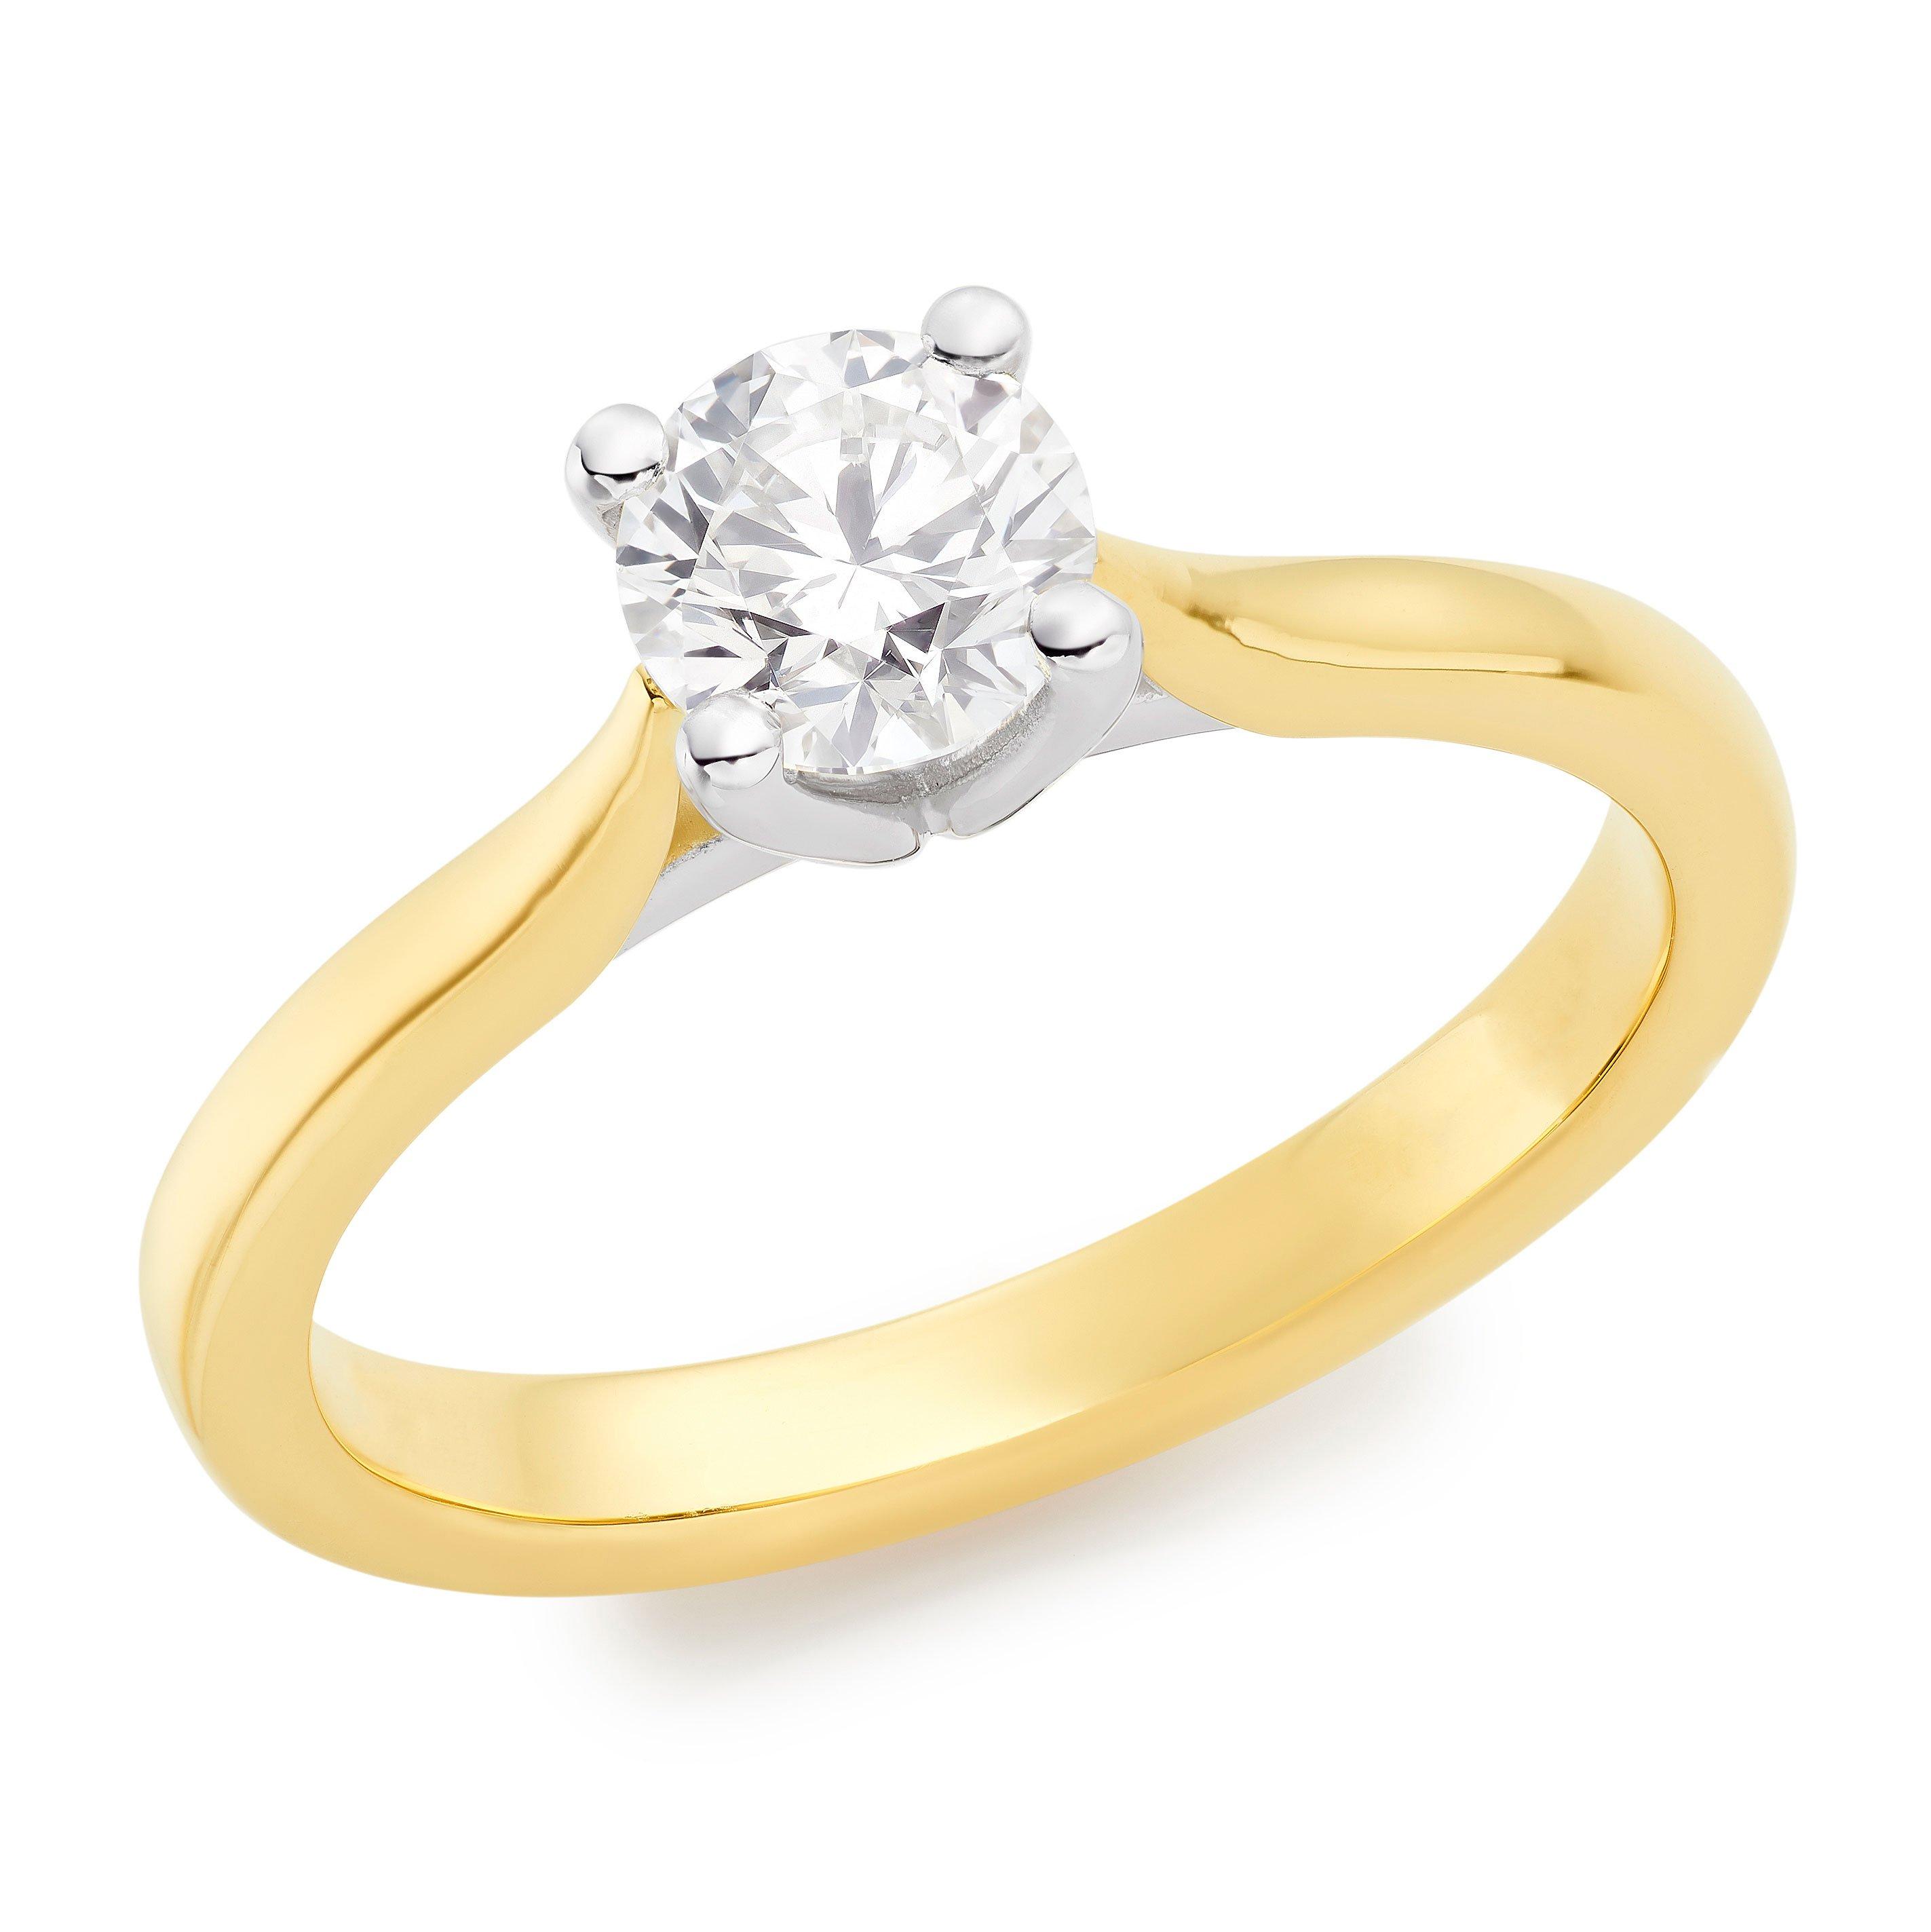 18ct Yellow Gold Diamond Solitaire Ring | 0133645 | Beaverbrooks the ...